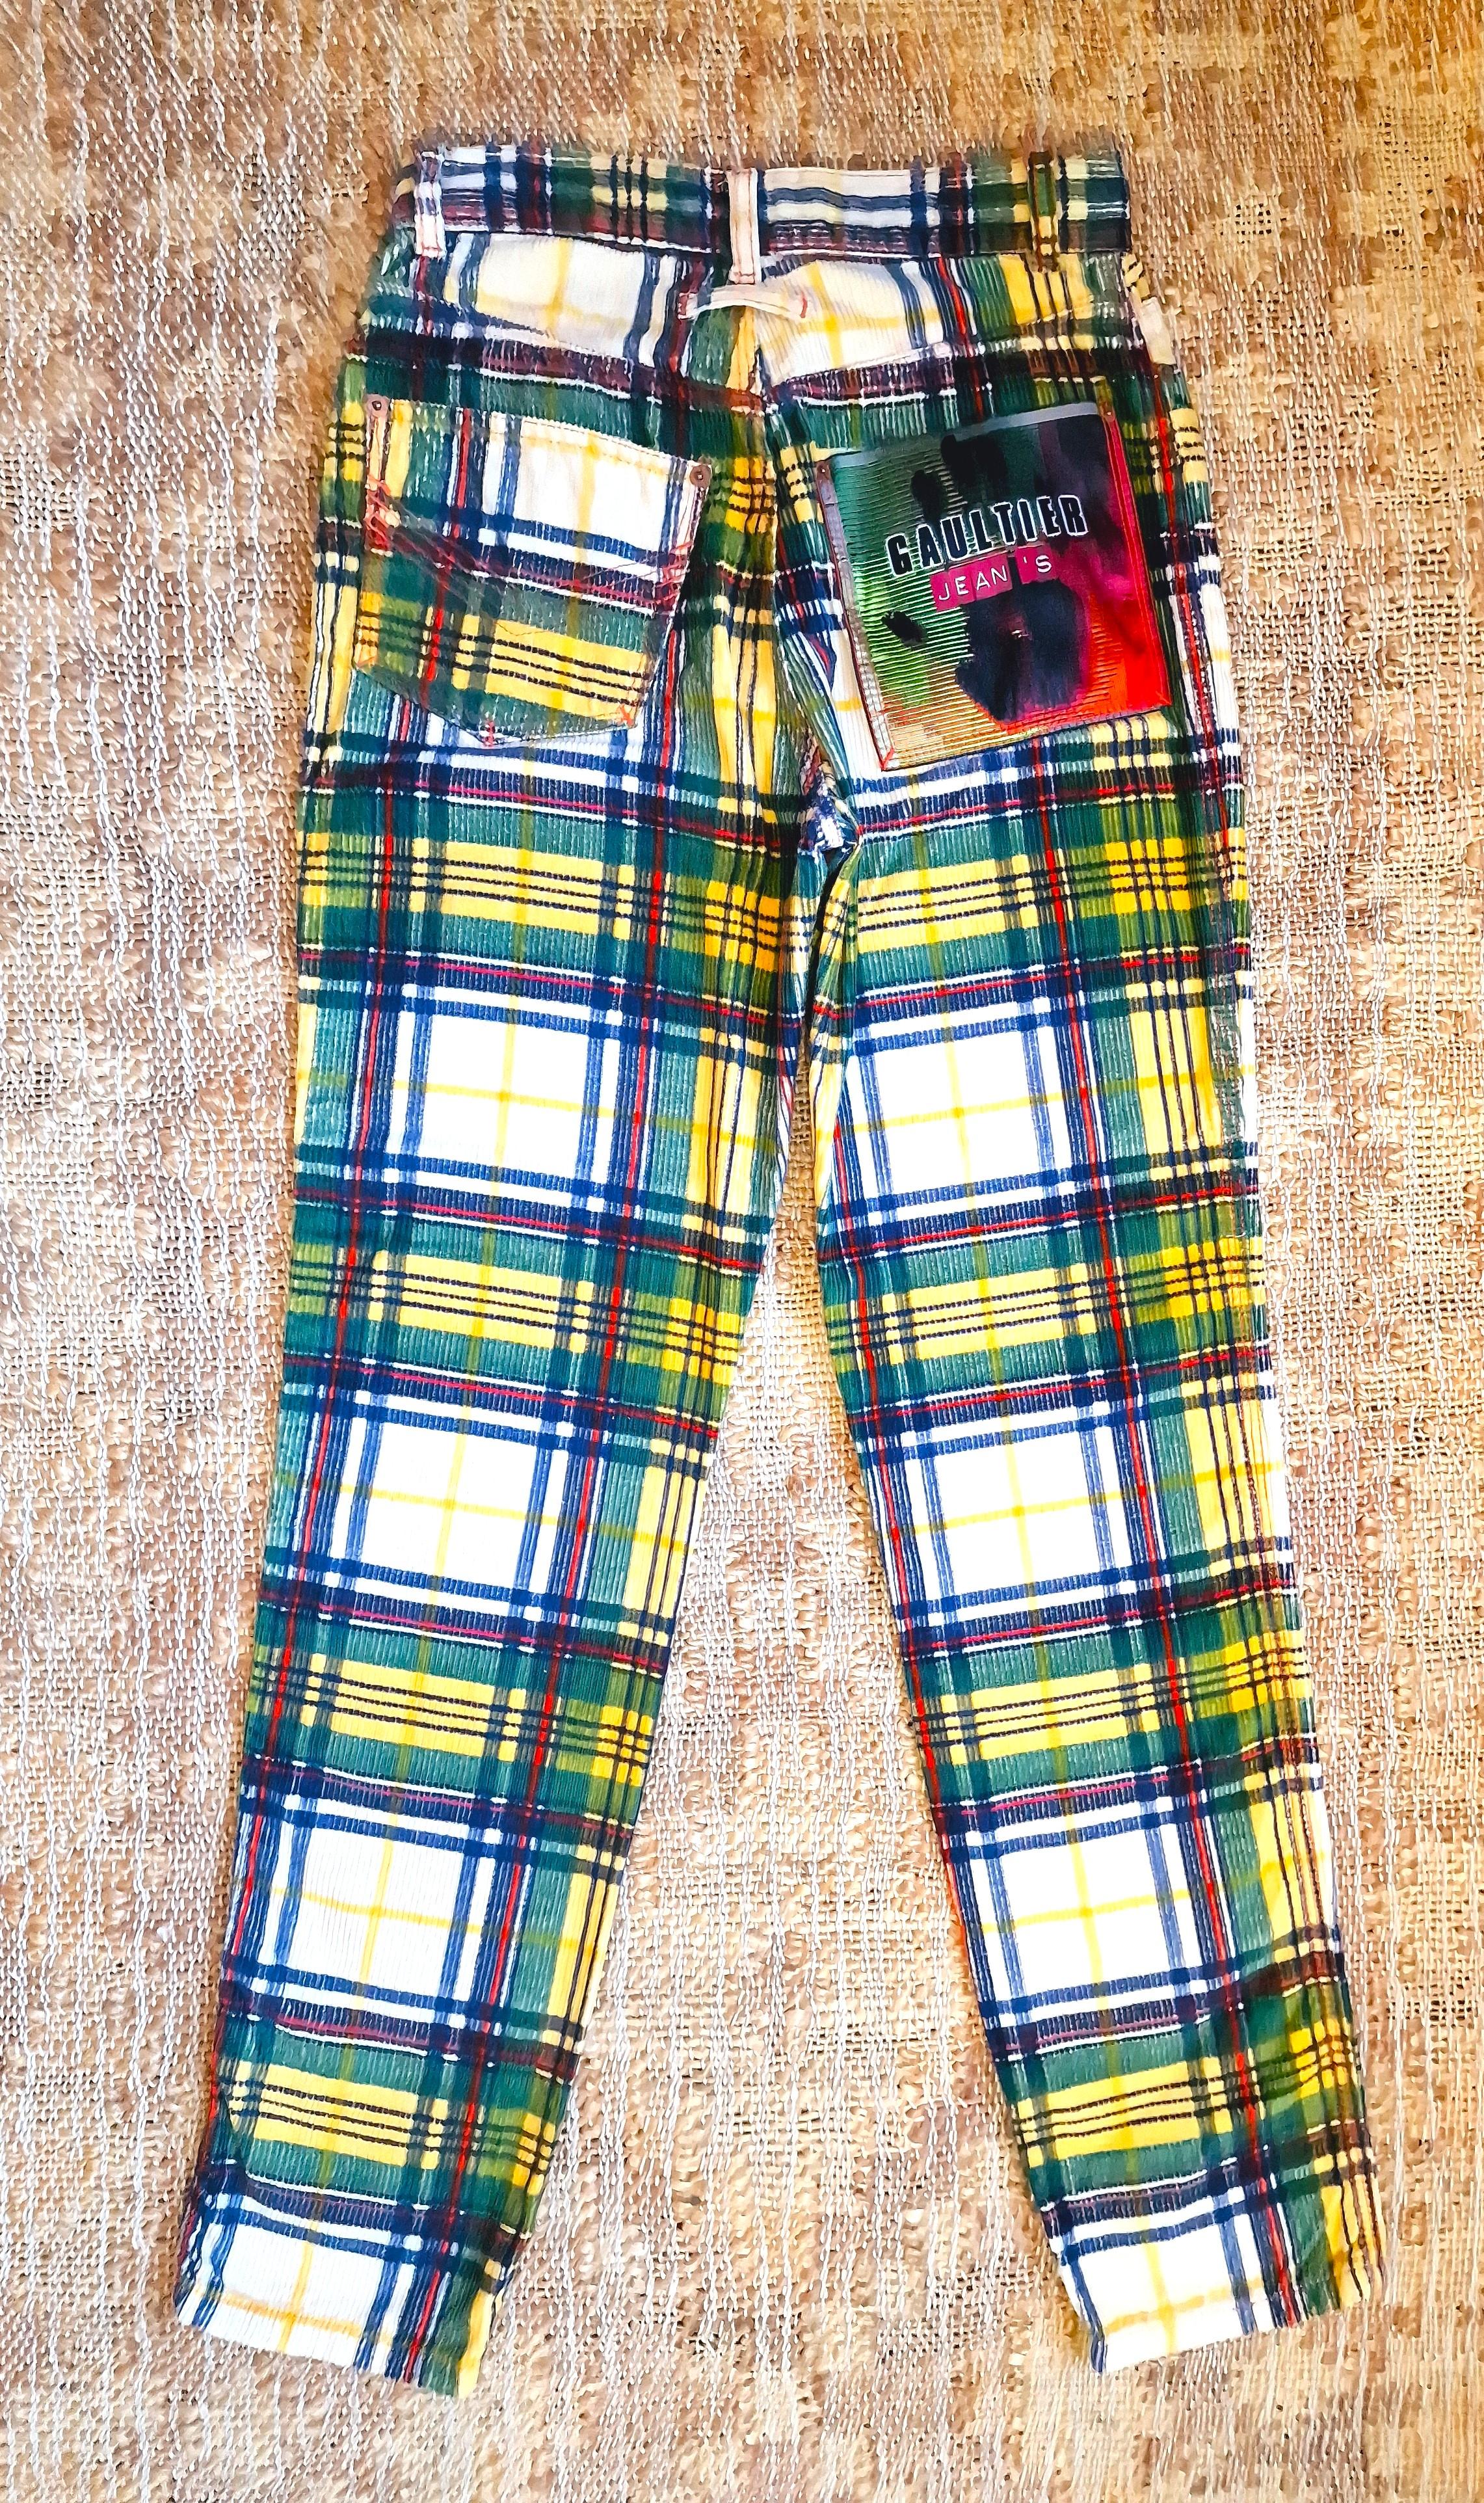 Jean Paul Gaultier Tartan Plaid Checked Cord Trousers Small Medium Hand Pants In Excellent Condition For Sale In PARIS, FR